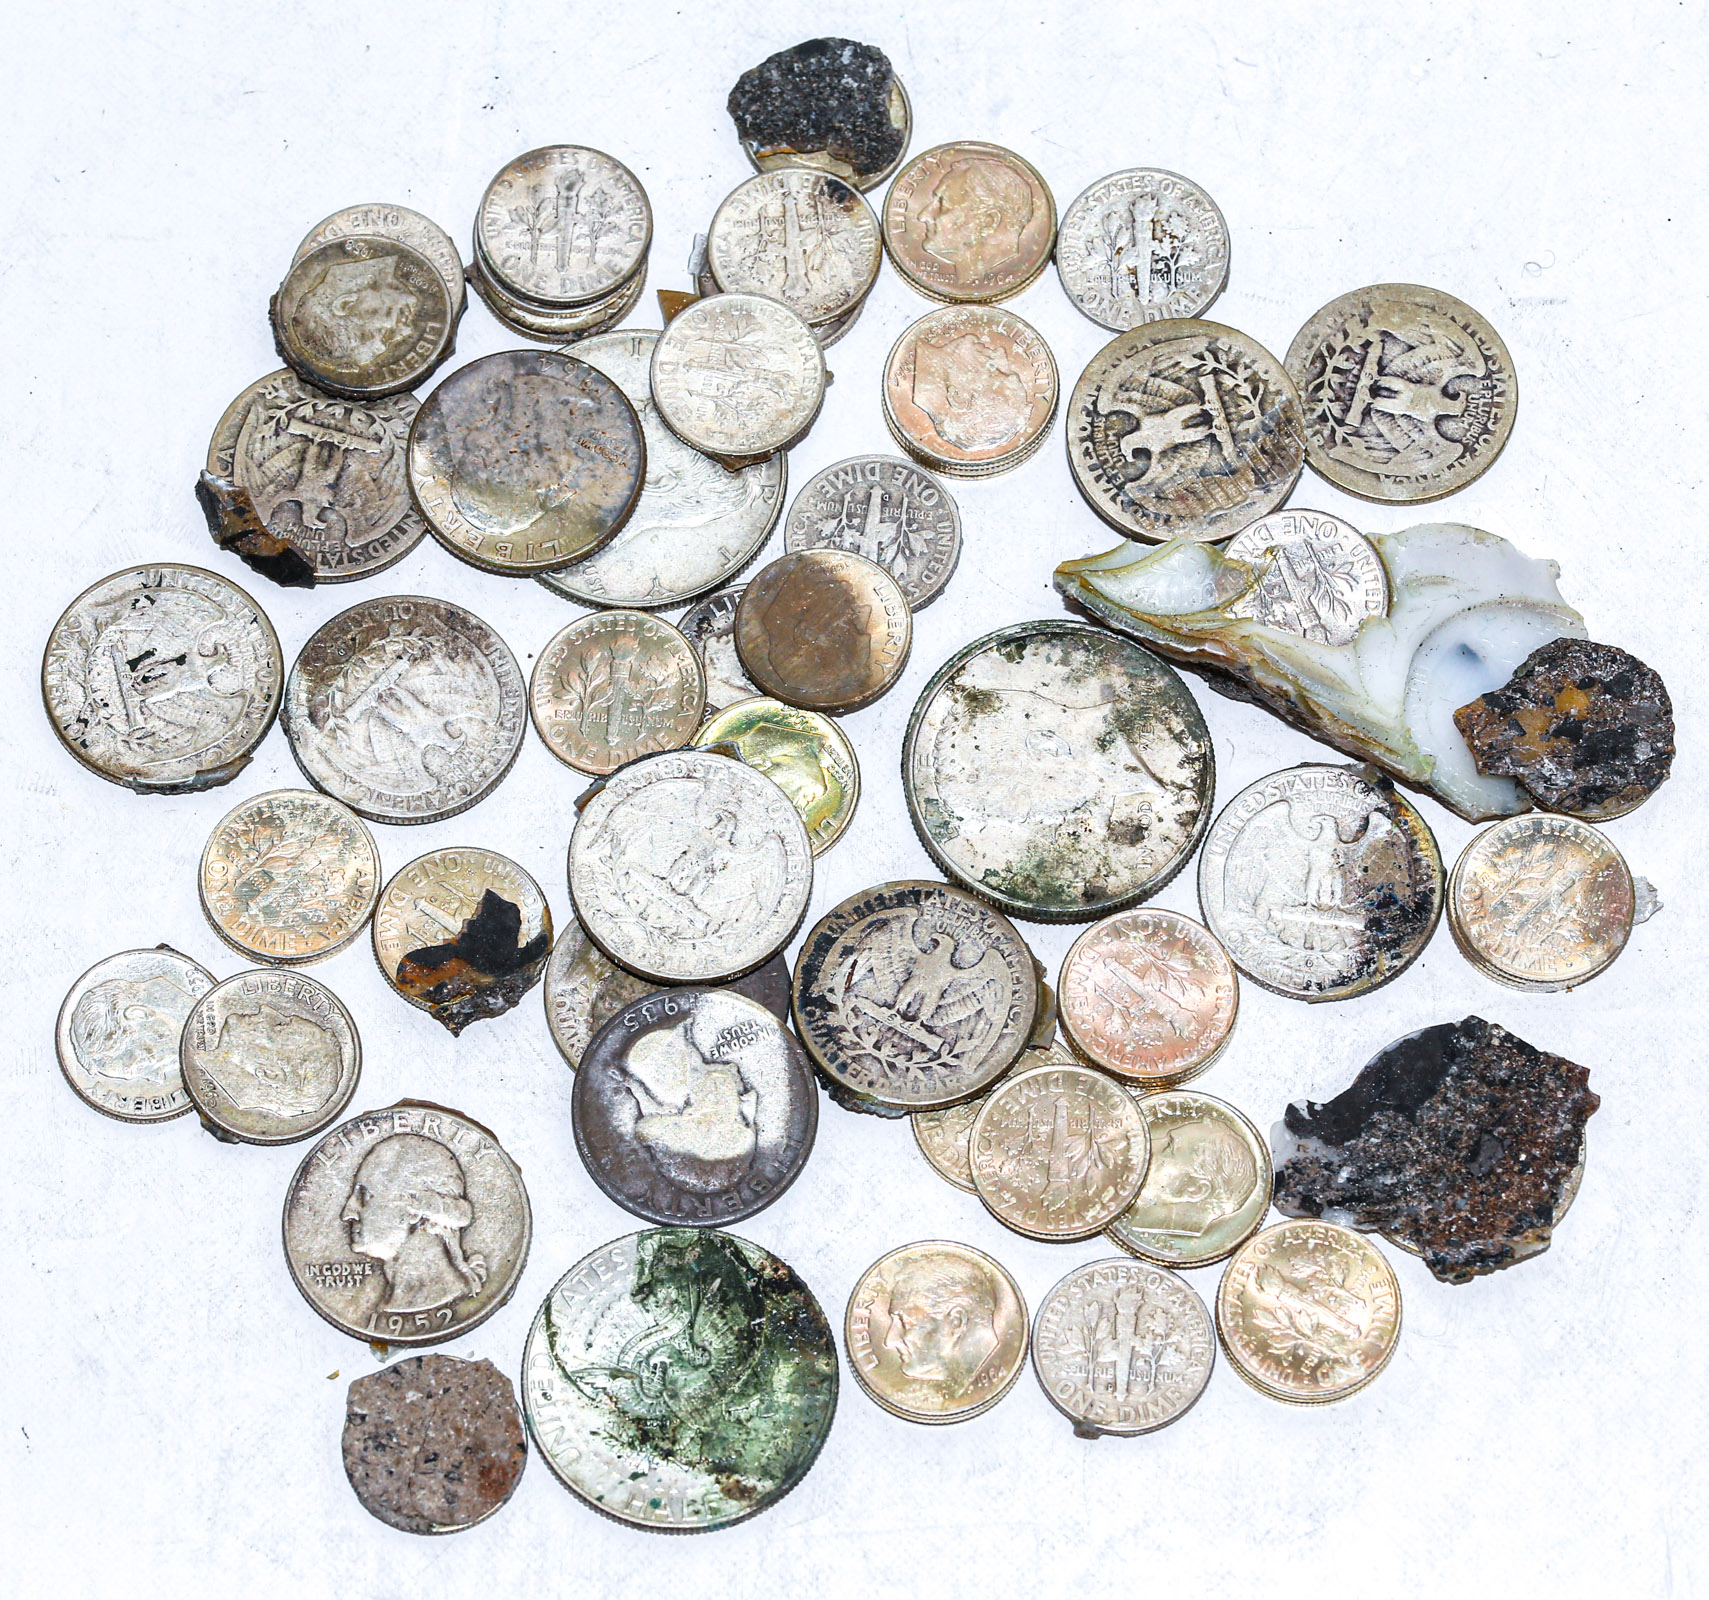 SILVER COINS WITH FOREIGN SUBSTANCE 369d6e